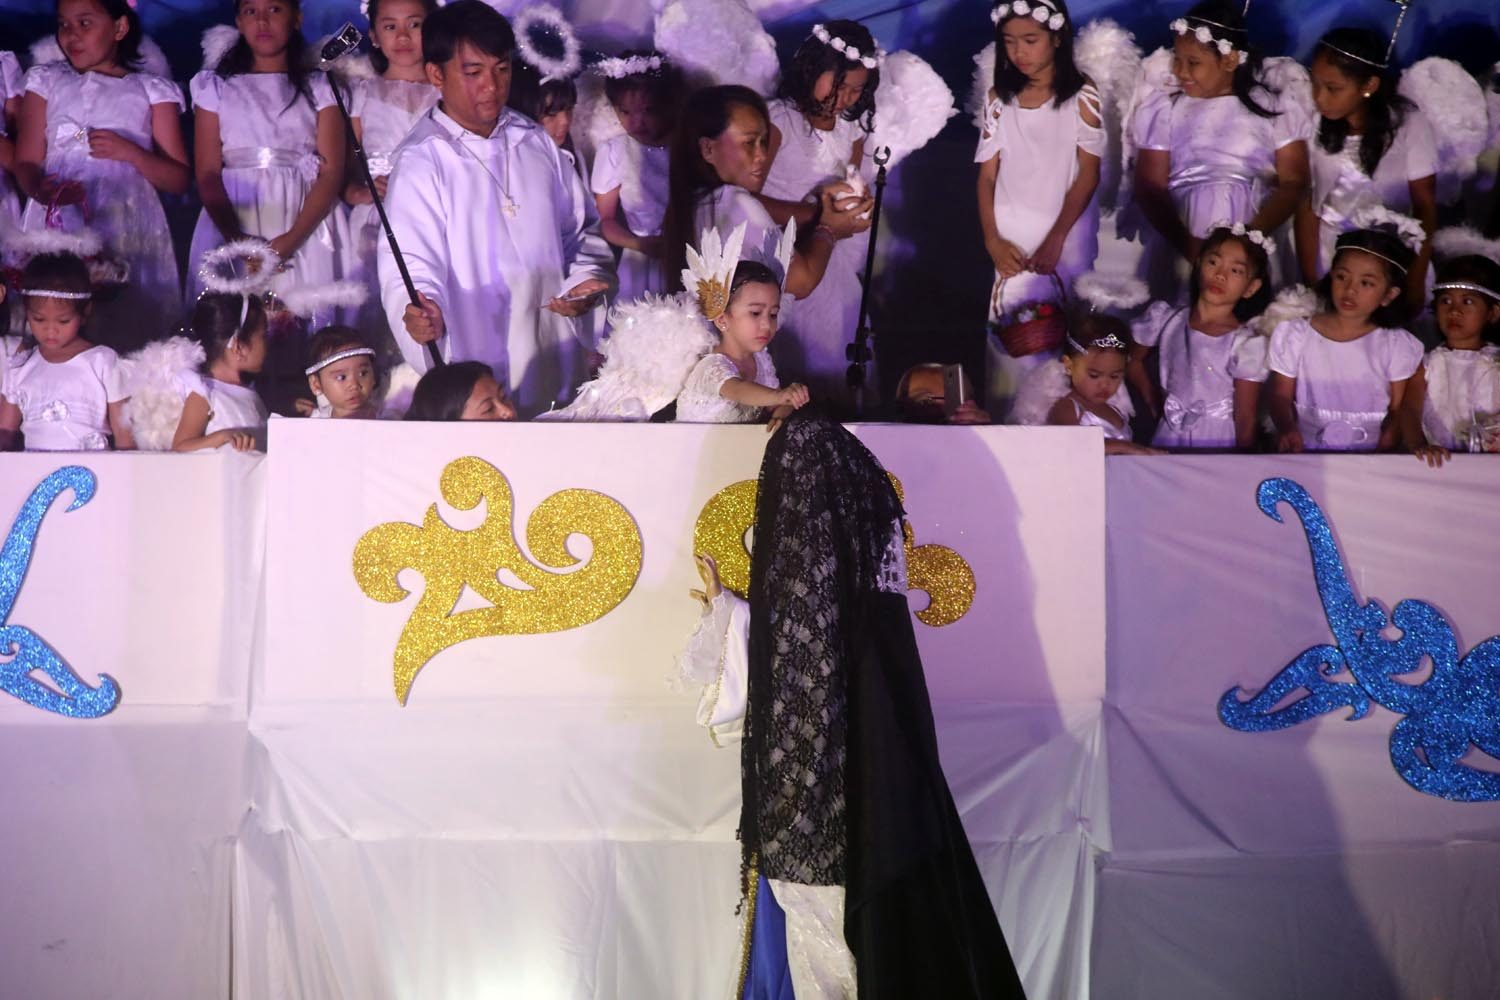 A child dressed as an angel removes the veil of the Blessed Virgin Mary during the Easter Salubong at Saint Peter Parish in Quezon City on April 1, 2018. Photo by Darren Langit/Rappler 